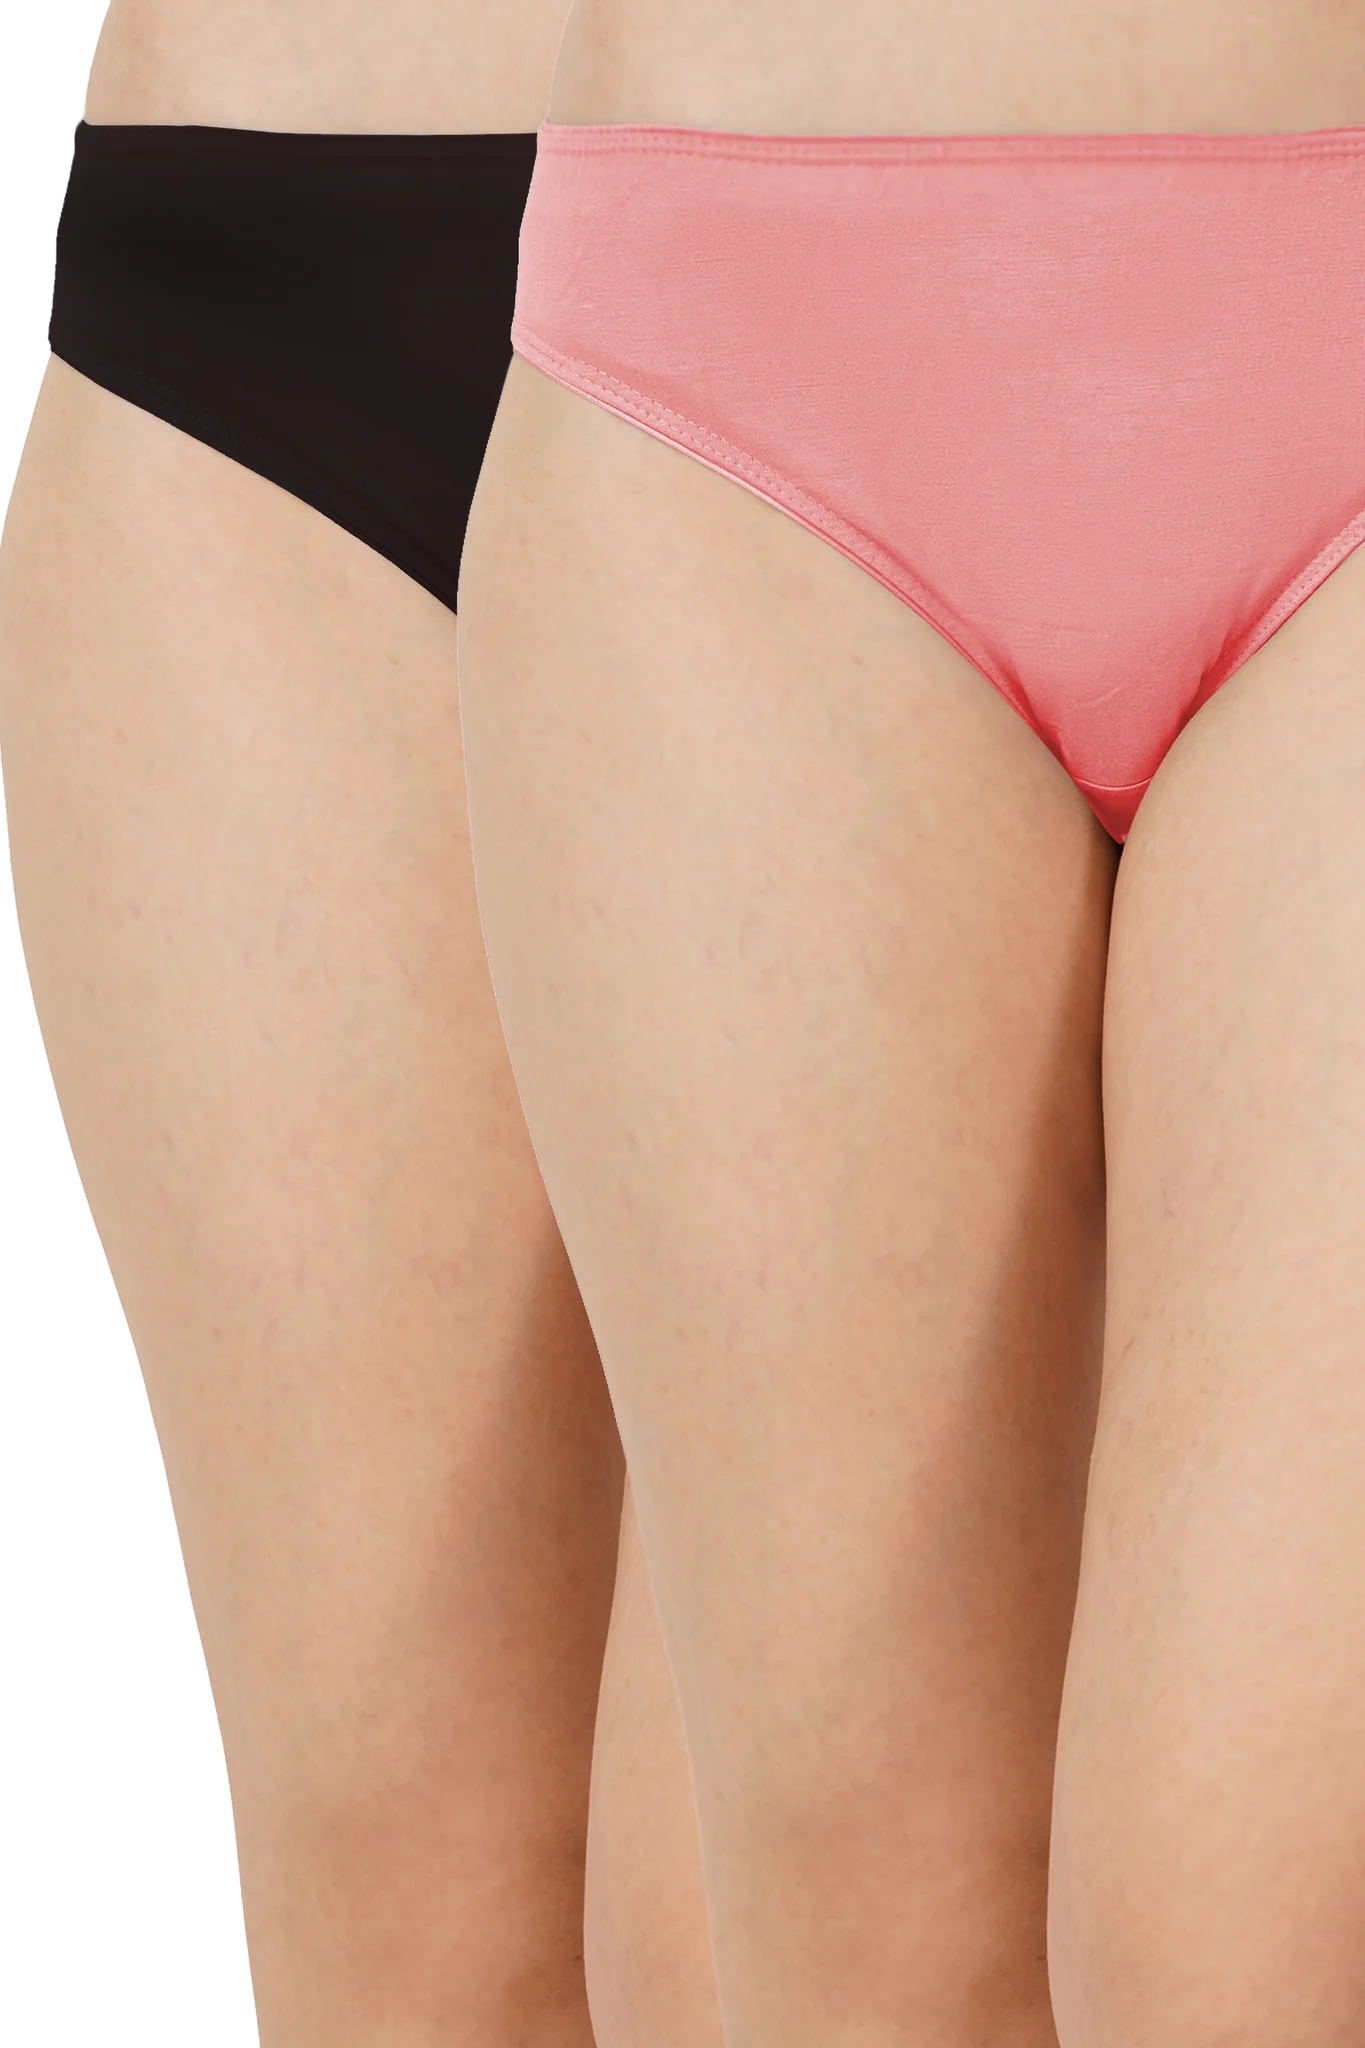 Product: Low Waist Bamboo Panty Set of 2 | Size S